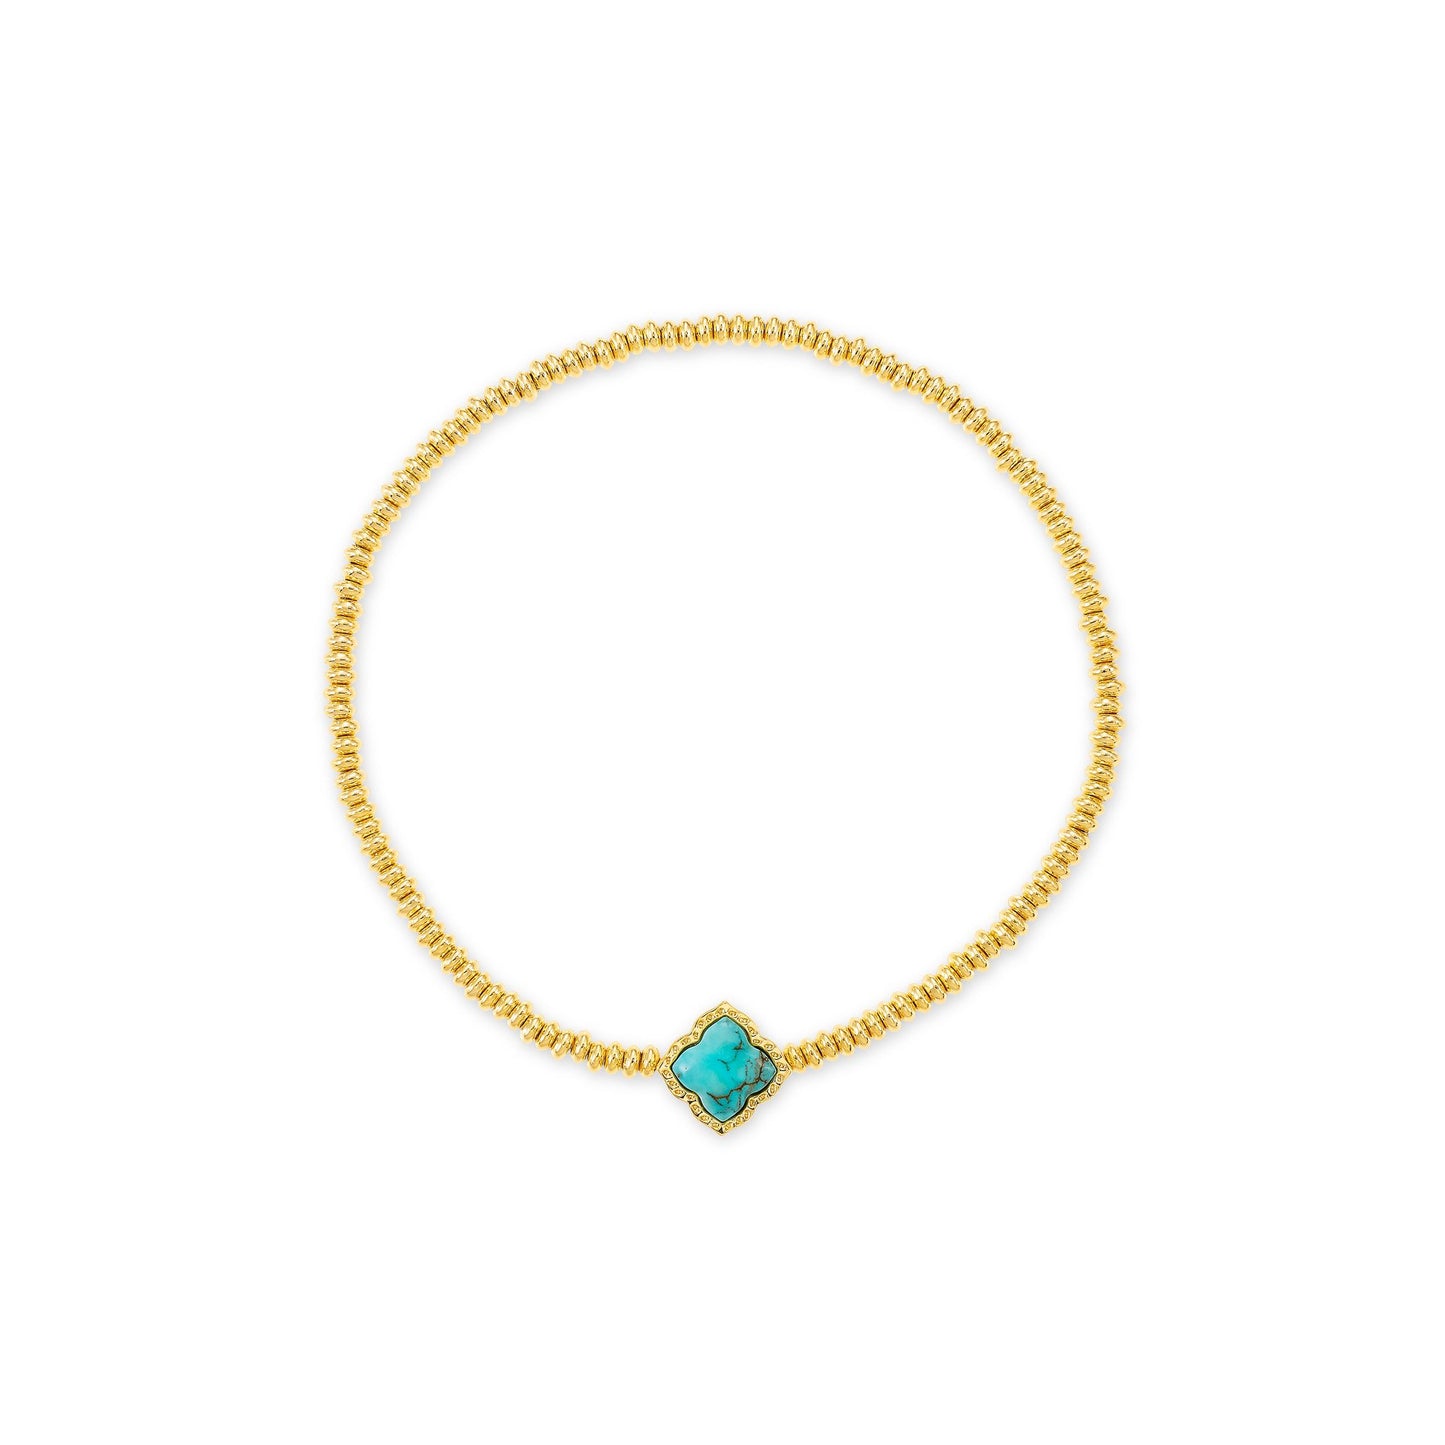 Fall 1 Mallory Stretch Bracelet In Gold Variegated Turquoise